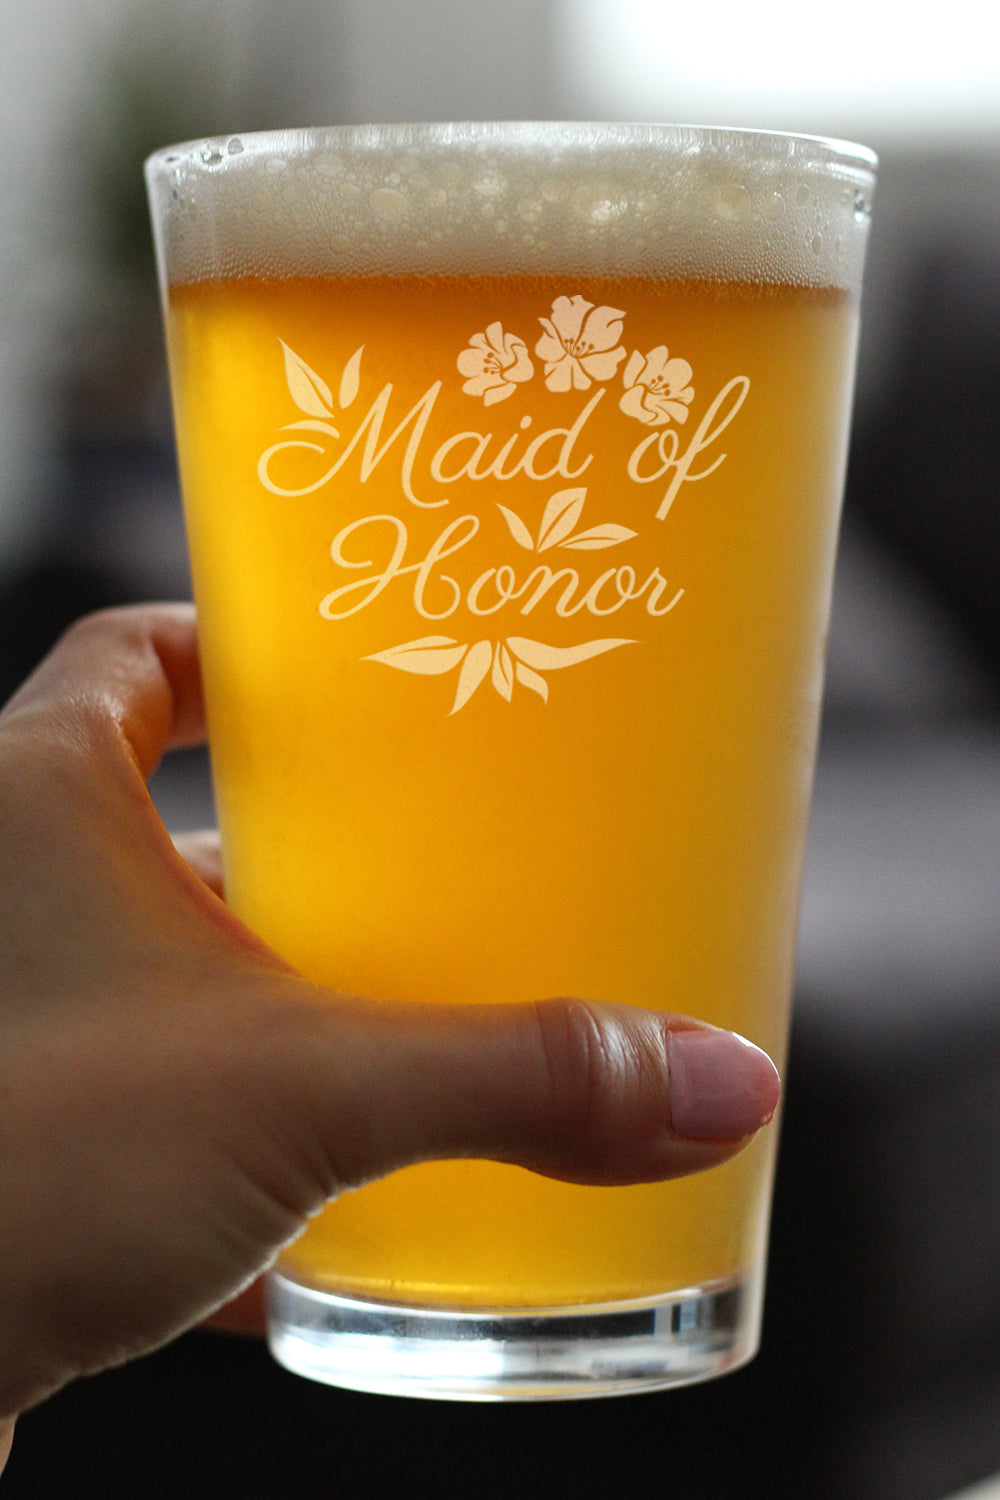 Maid of Honor Pint Glass - Maid of Honor Proposal Gifts - Unique Engraved Wedding Cup Gift